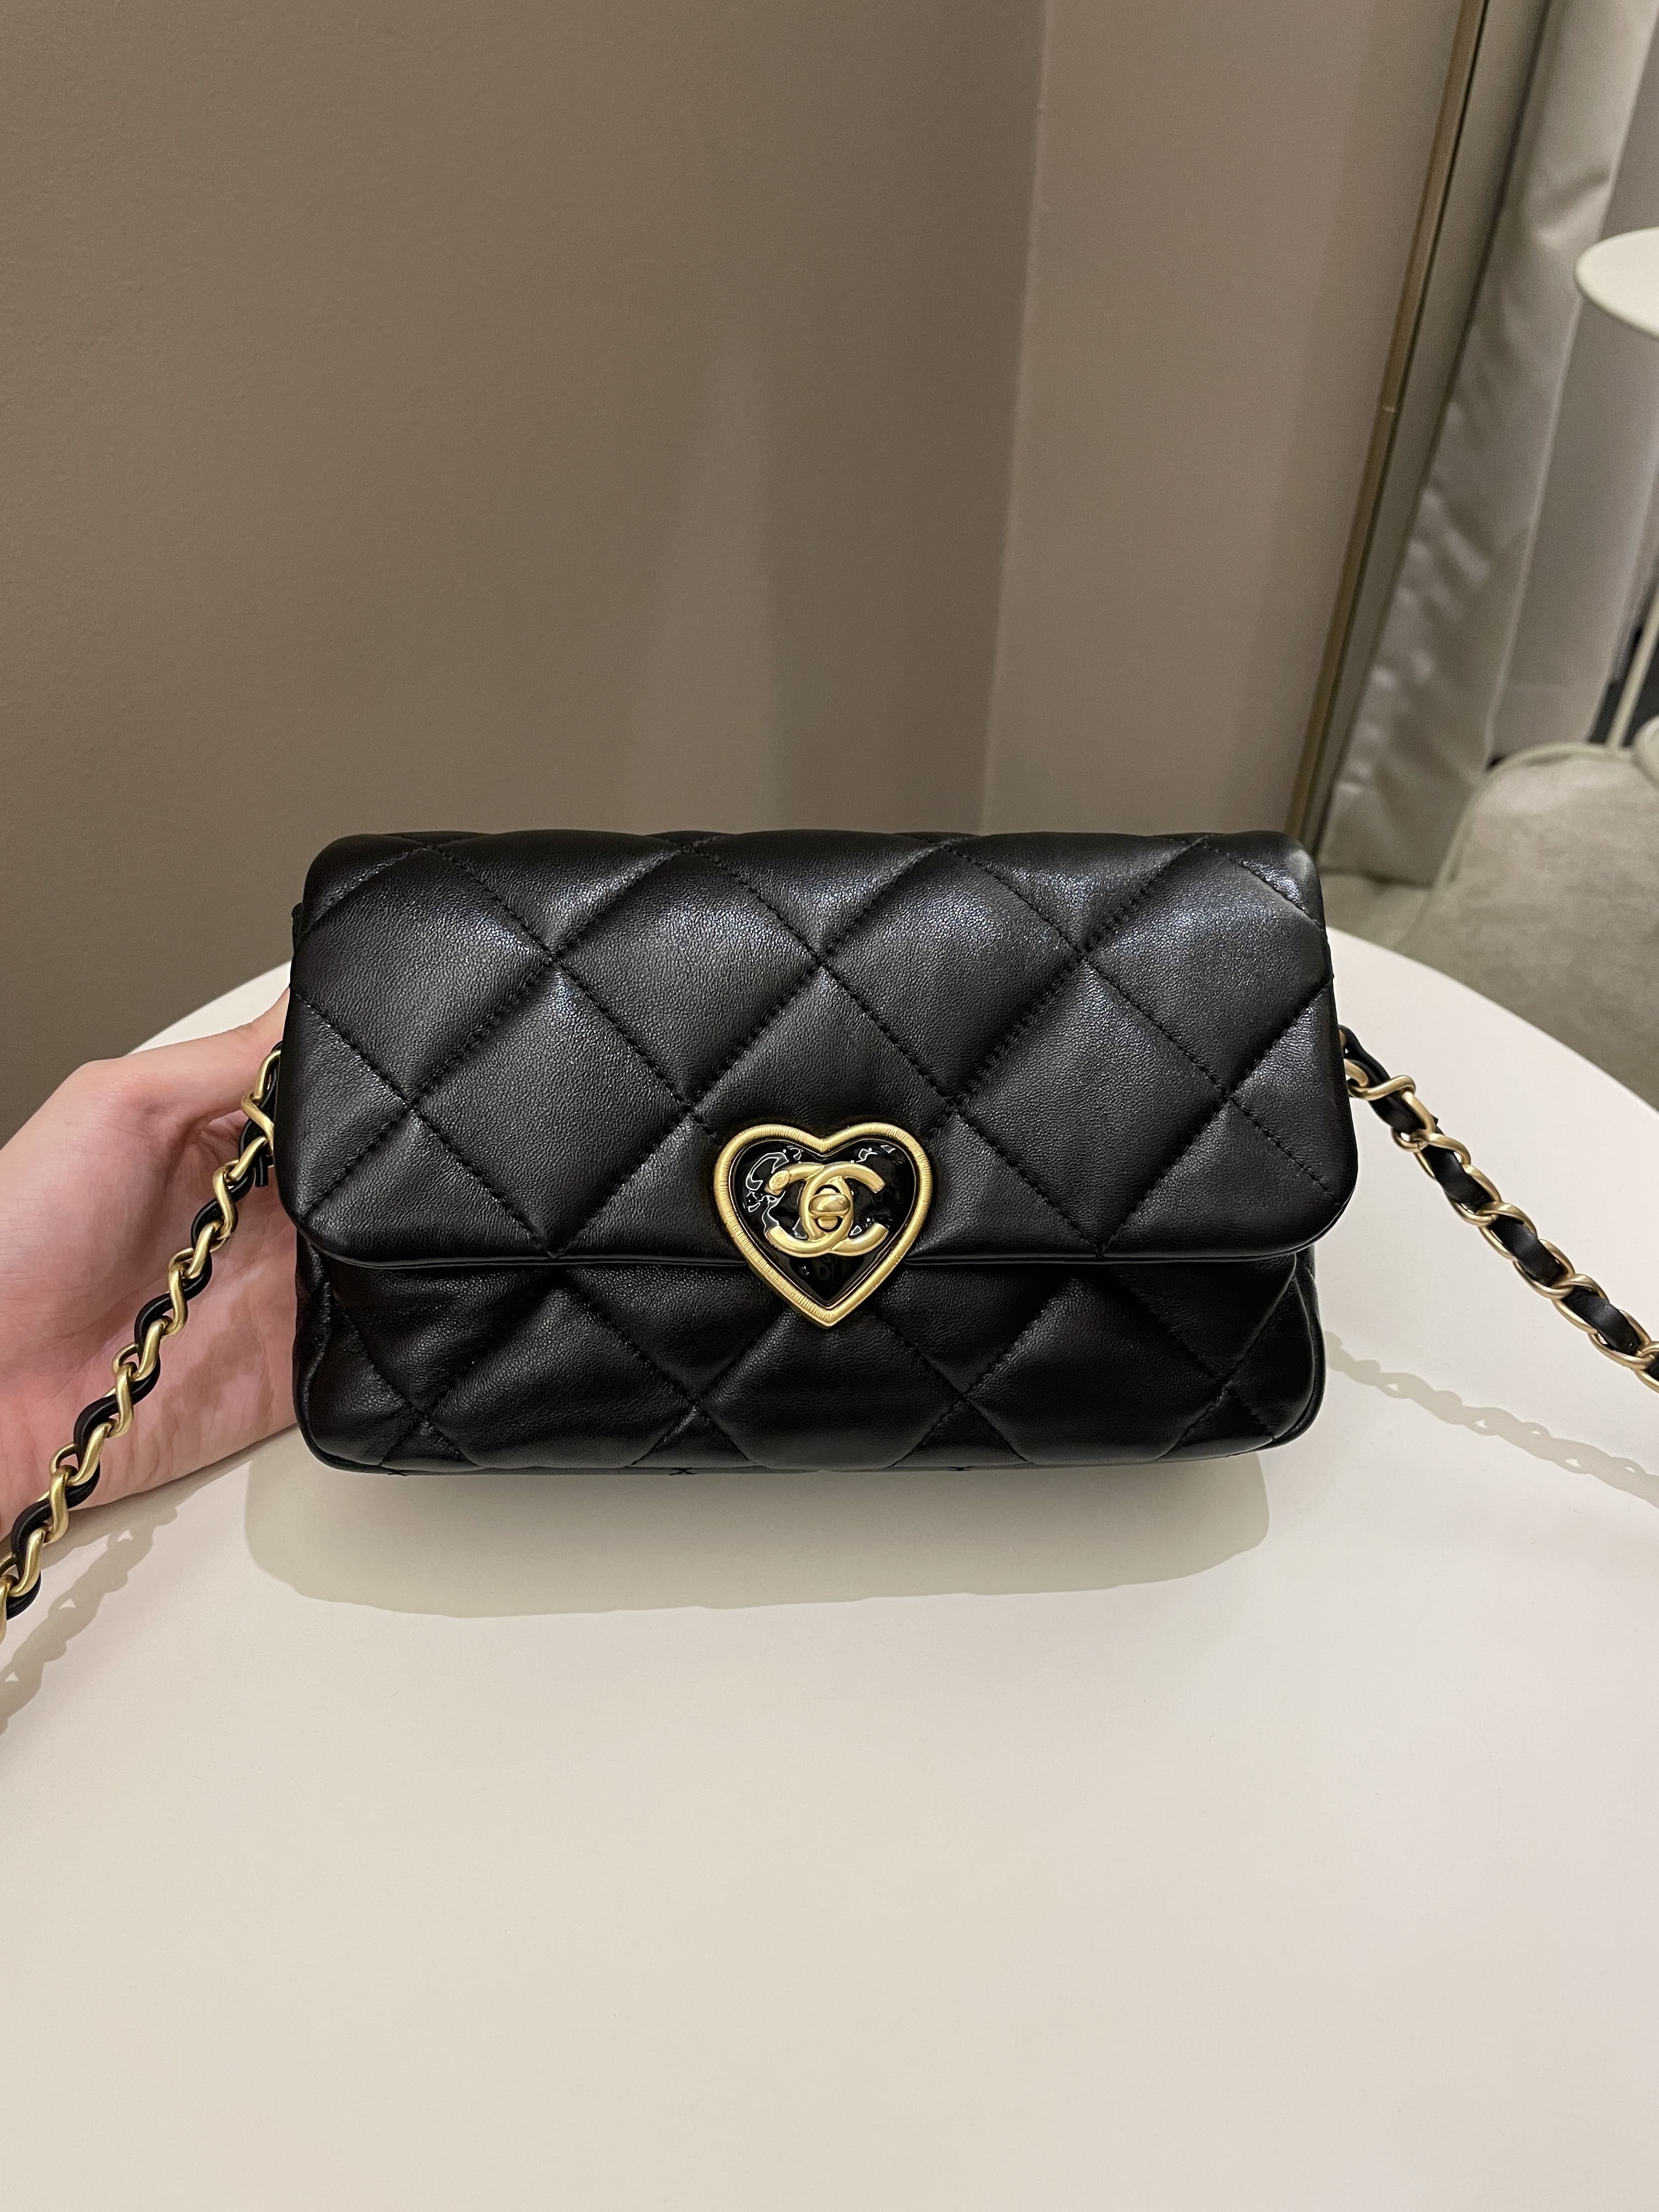 CHANEL ZIP CARD HOLDER REVIEW 